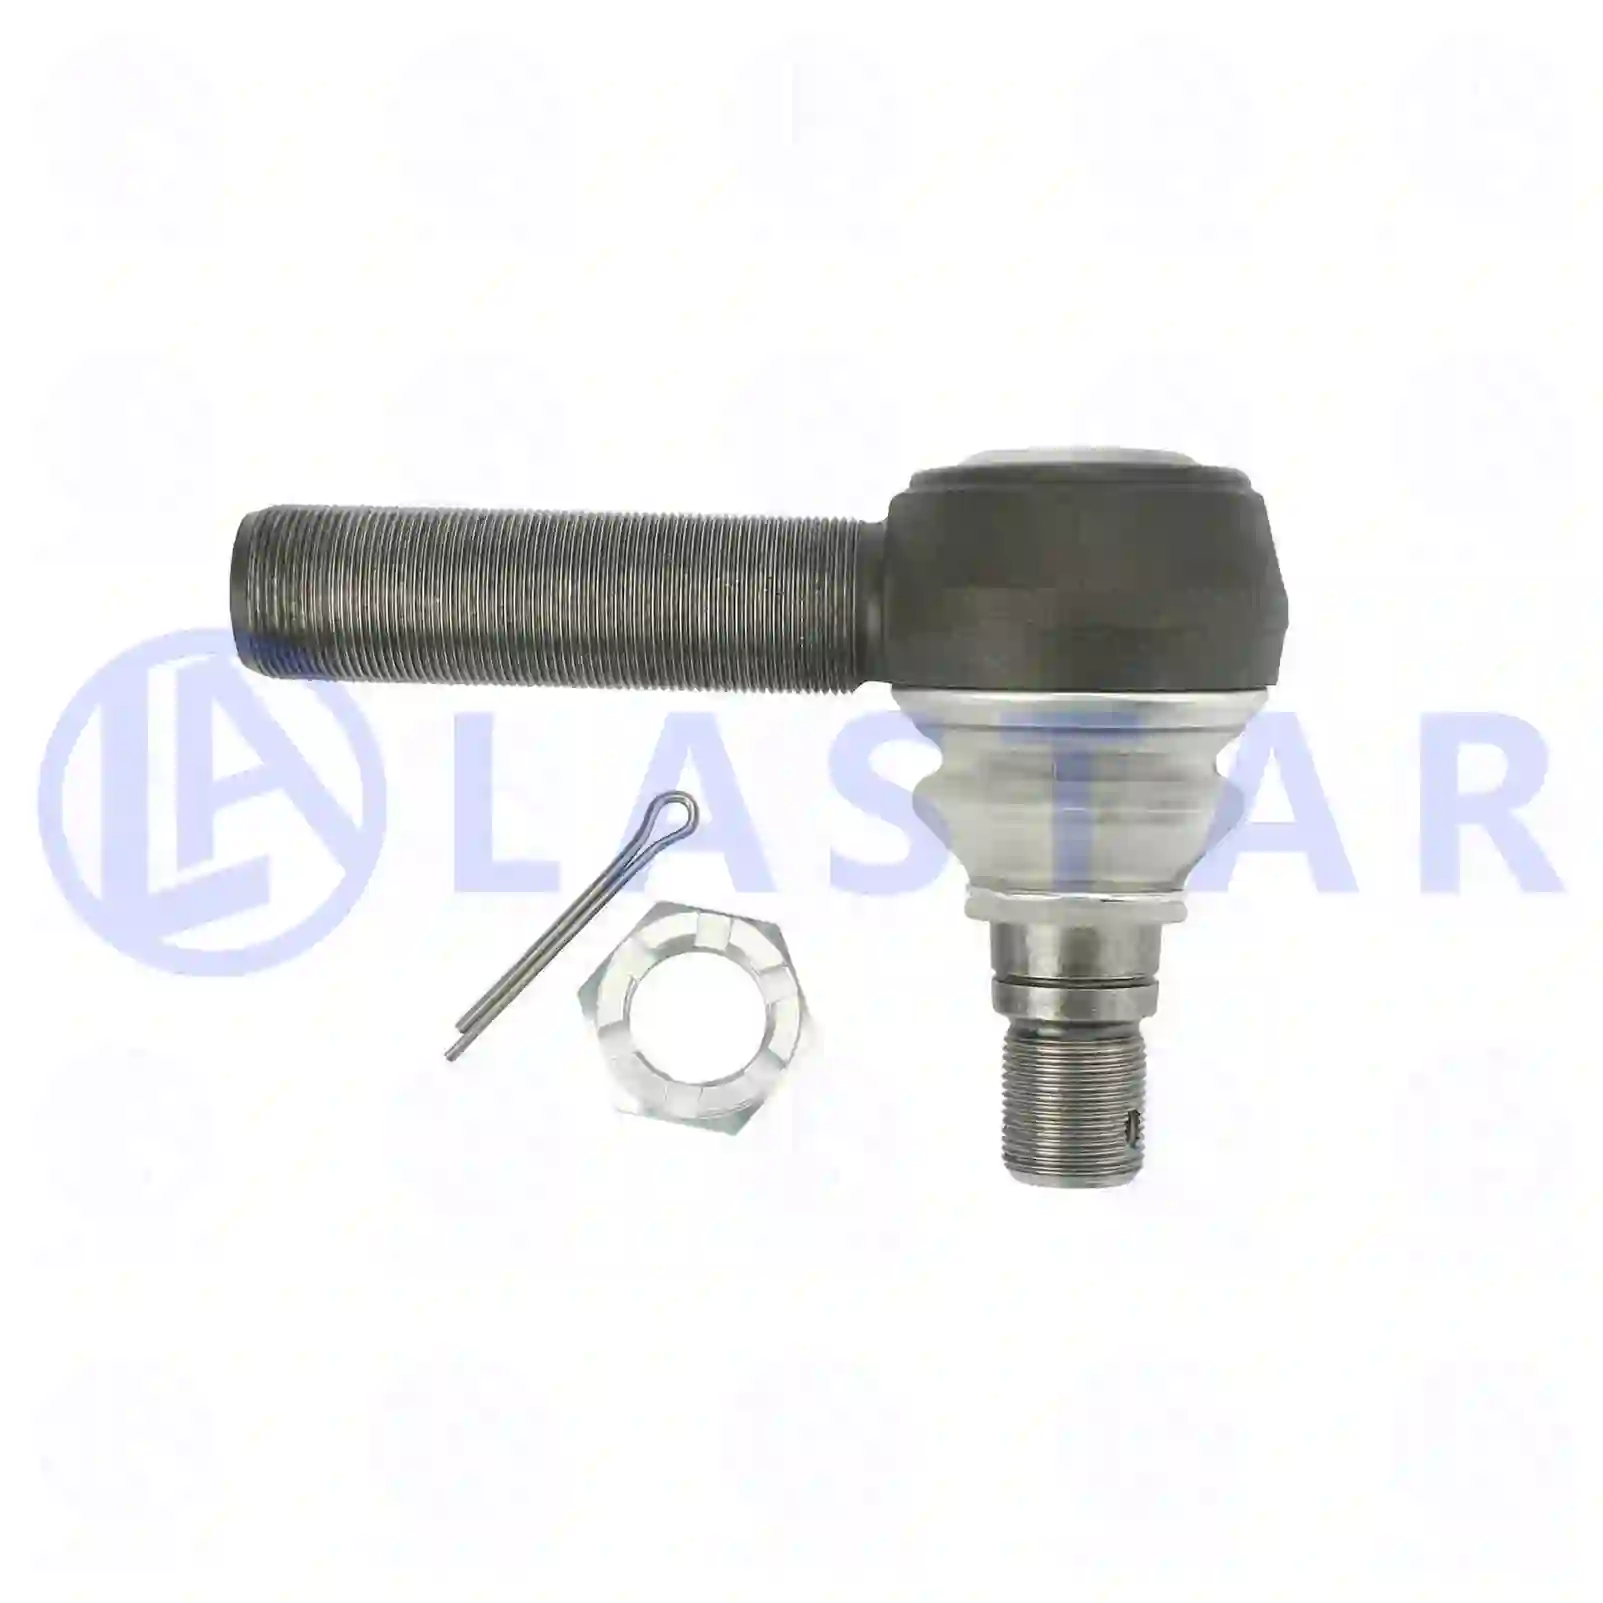 Drag Link Ball joint, right hand thread, la no: 77705111 ,  oem no:1685552, 42538384, 81953016286, 6293380010, 7420937674, 1358793, 1488890, 1534756, 2115316, 2244706, 20937674, ZG40381-0008 Lastar Spare Part | Truck Spare Parts, Auotomotive Spare Parts